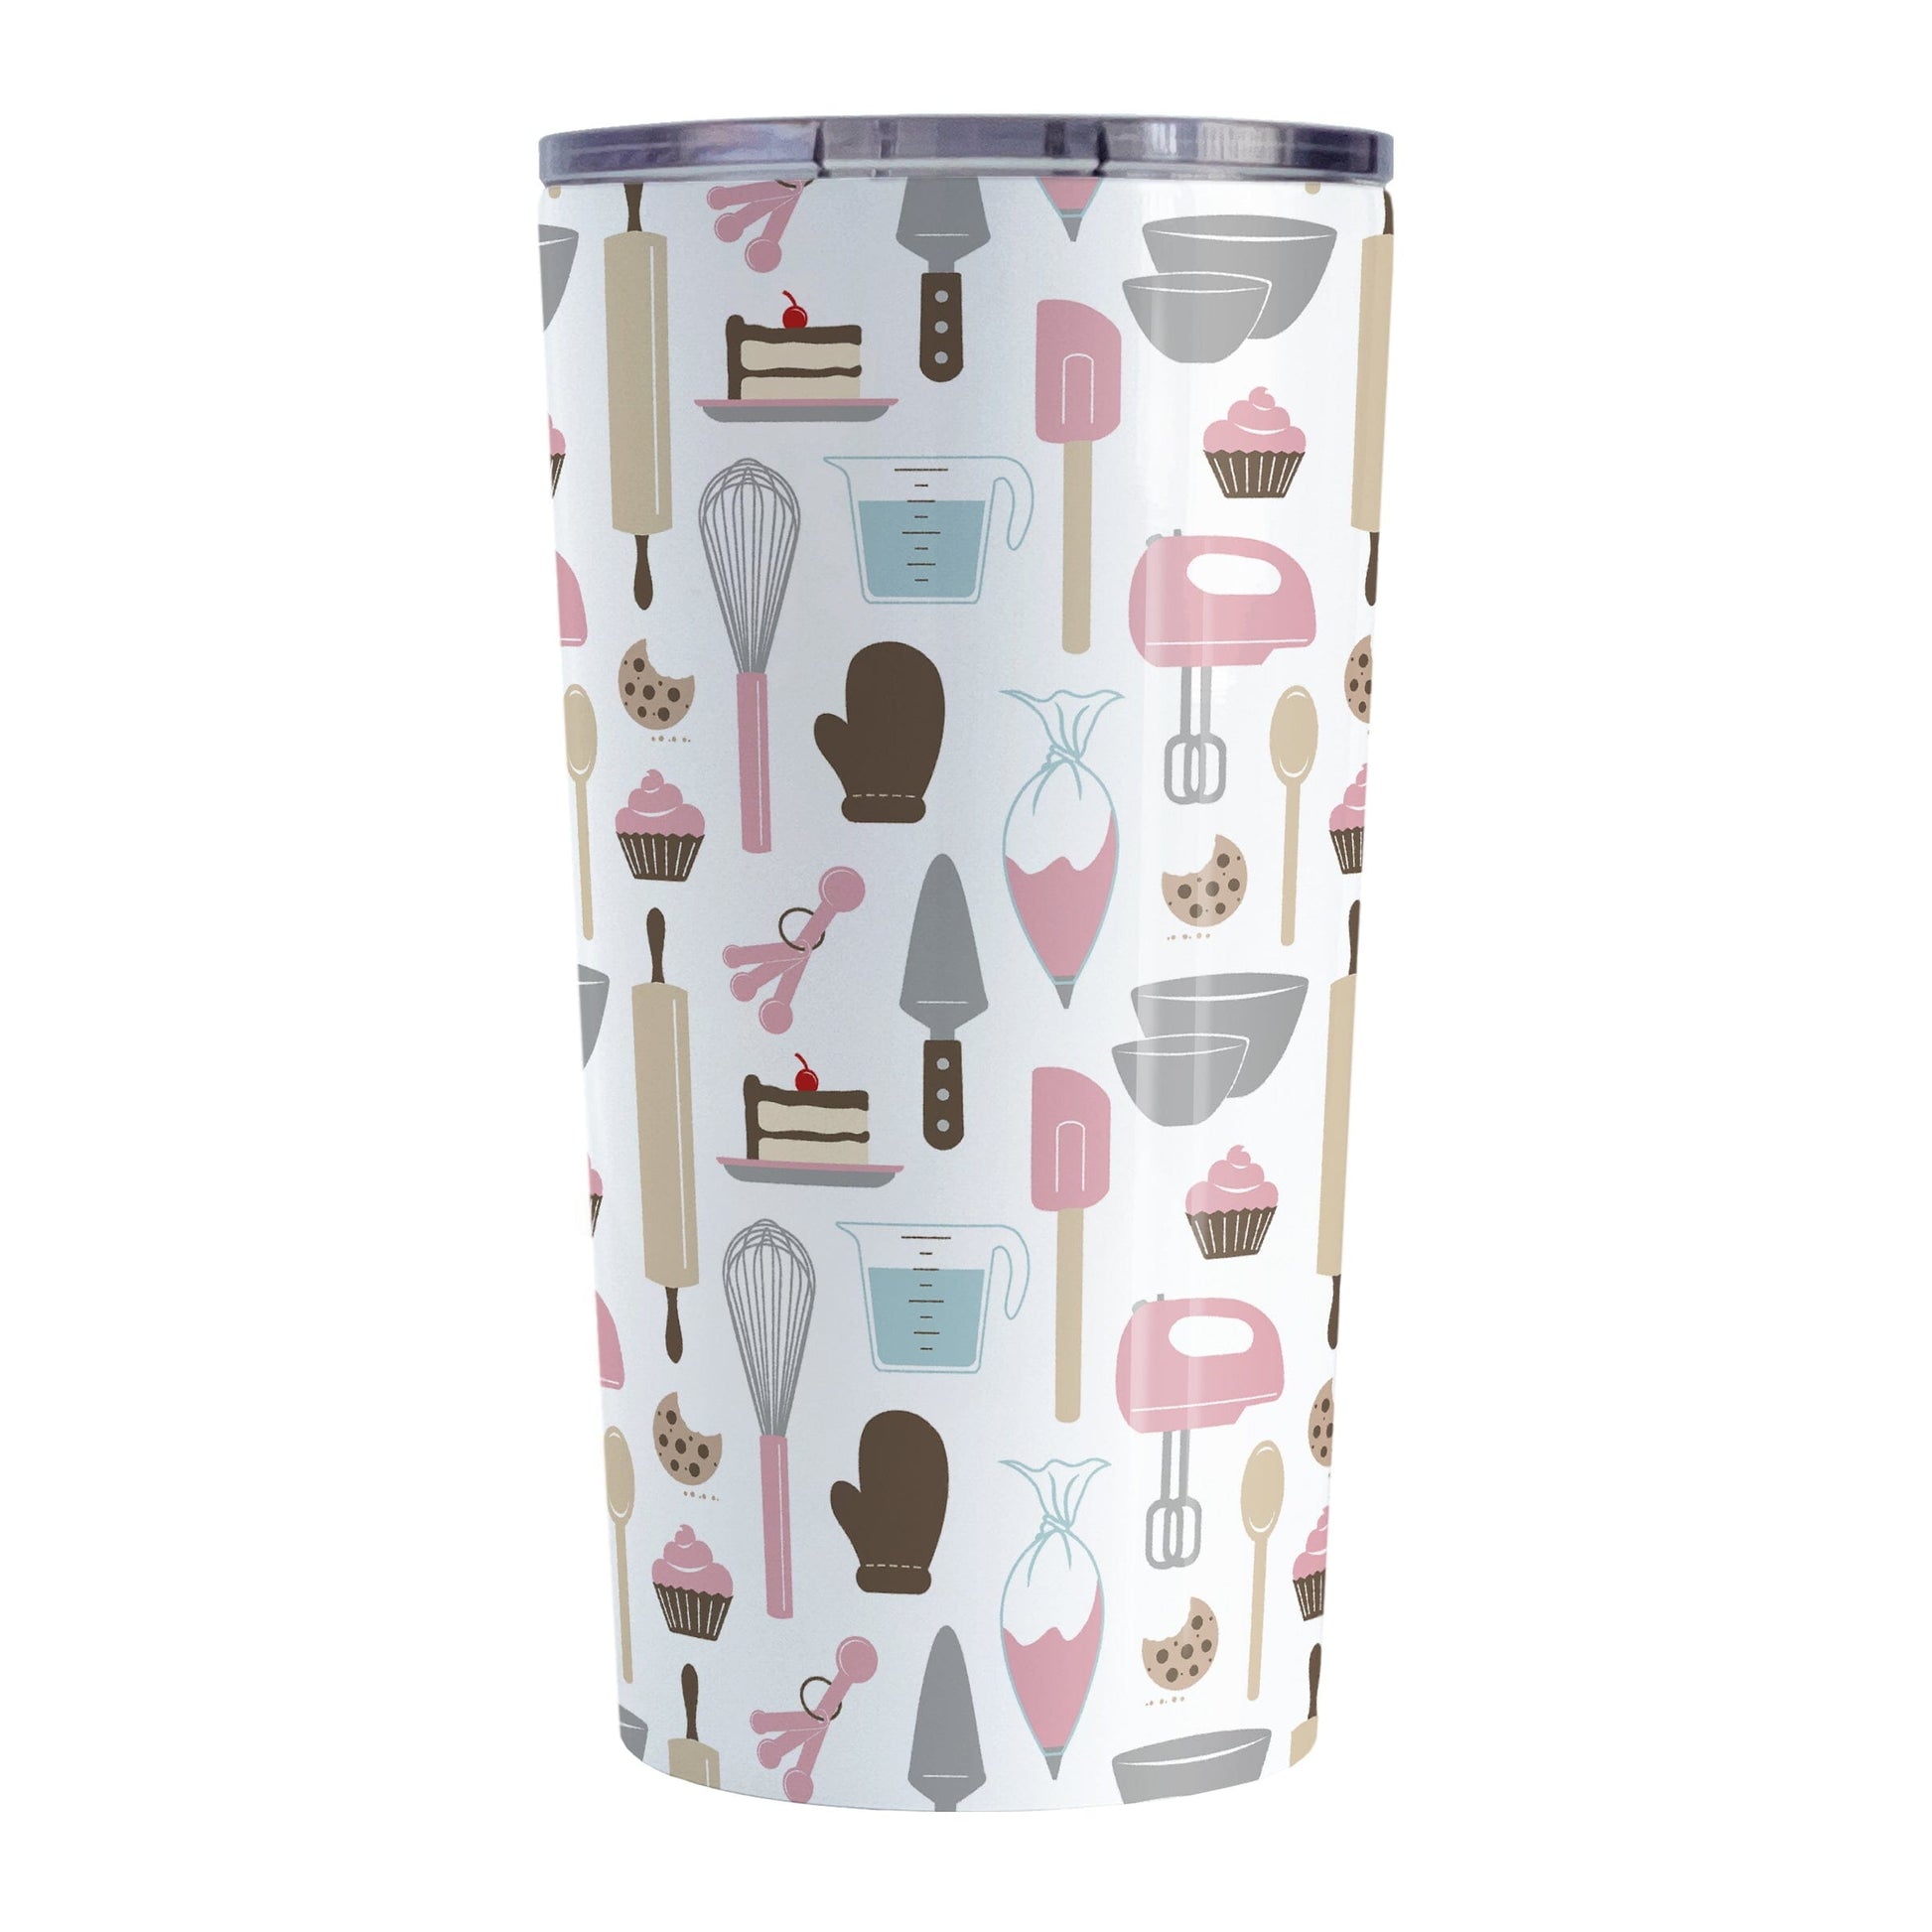 Pink Baking Pattern Tumbler Cup (20oz) at Amy's Coffee Mugs. A stainless steel tumbler cup designed with a pattern of baking tools like spatulas, whisks, mixers, bowls, and spoons, with cookies, cupcakes, and cake all in a pink, gray, brown, and beige color scheme that wraps around the cup. 